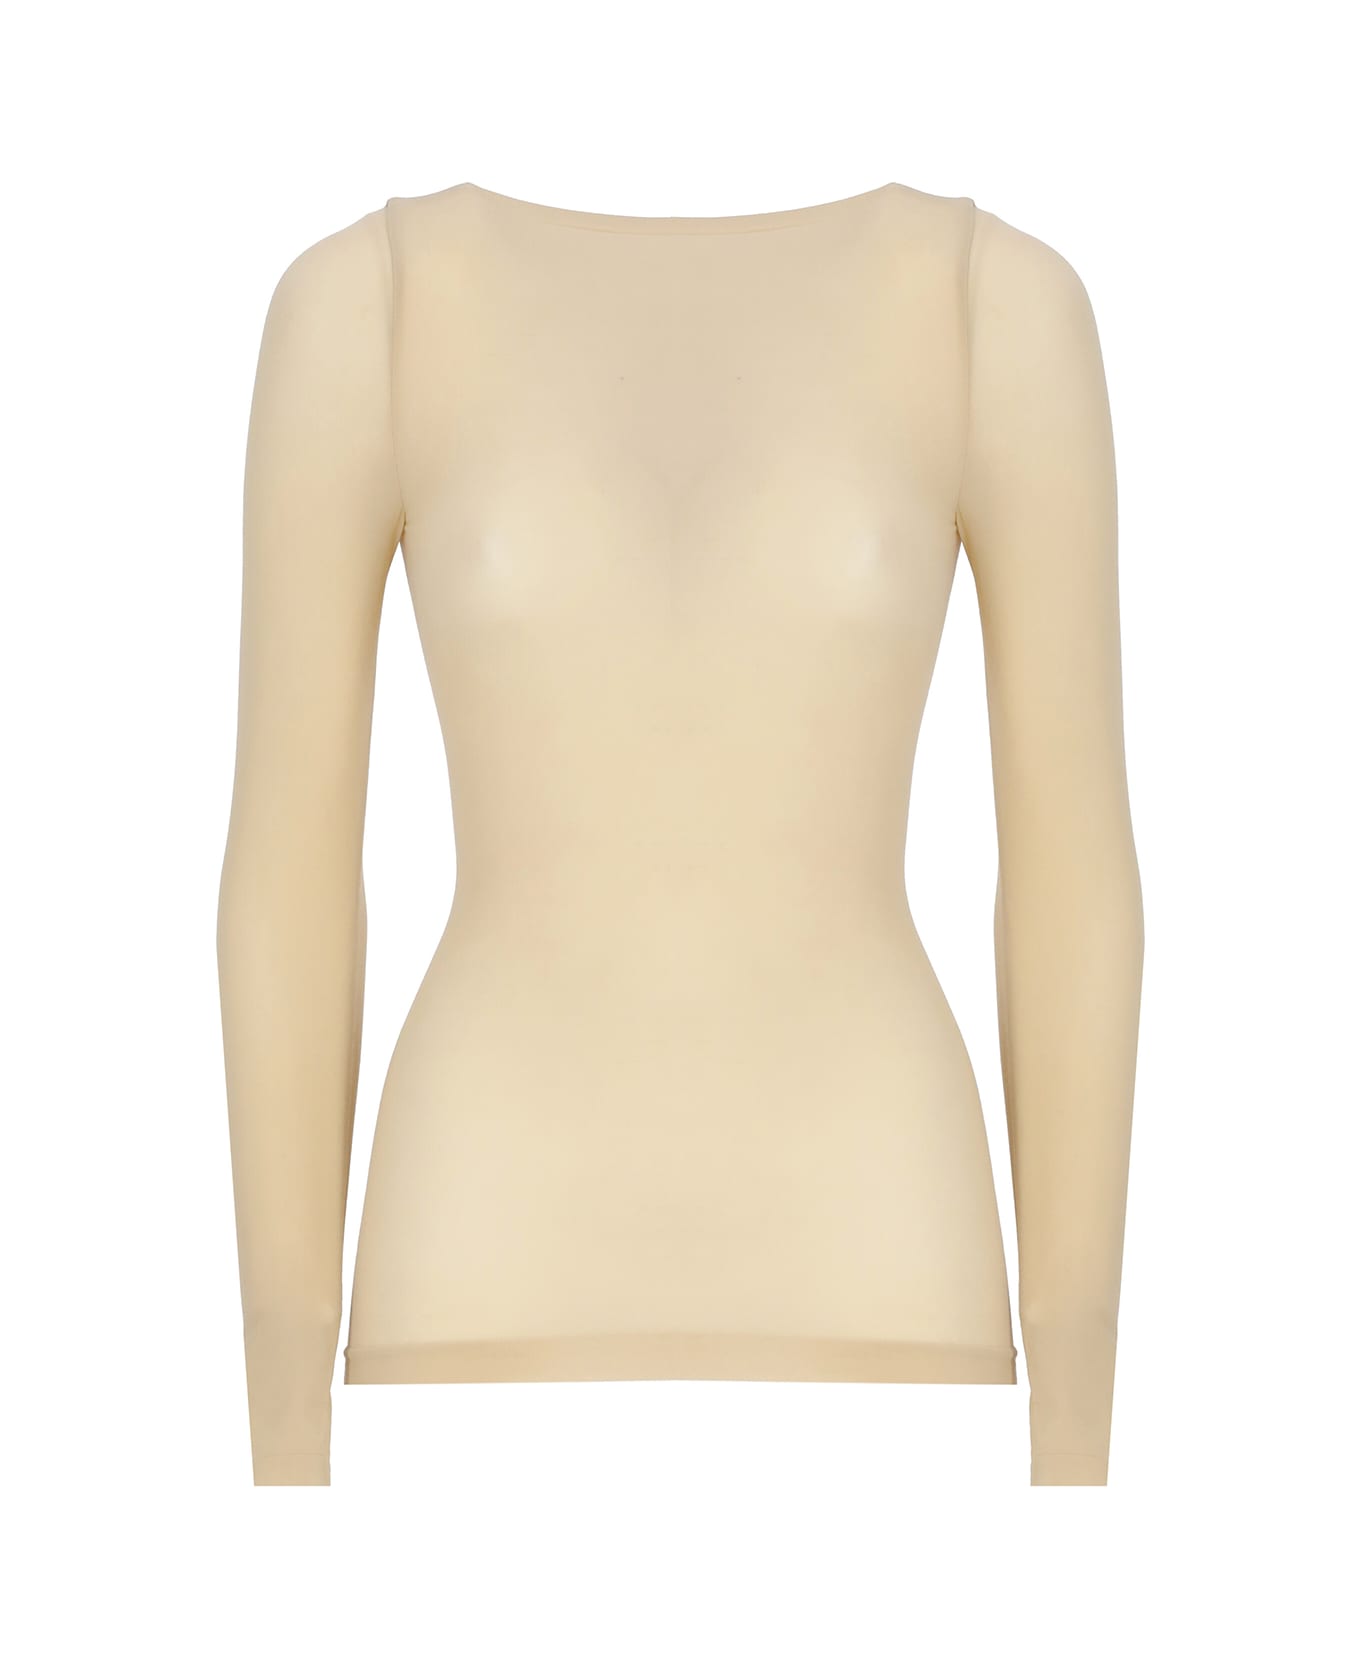 Wolford Buenos Aires T-shirt - Beige Tシャツ